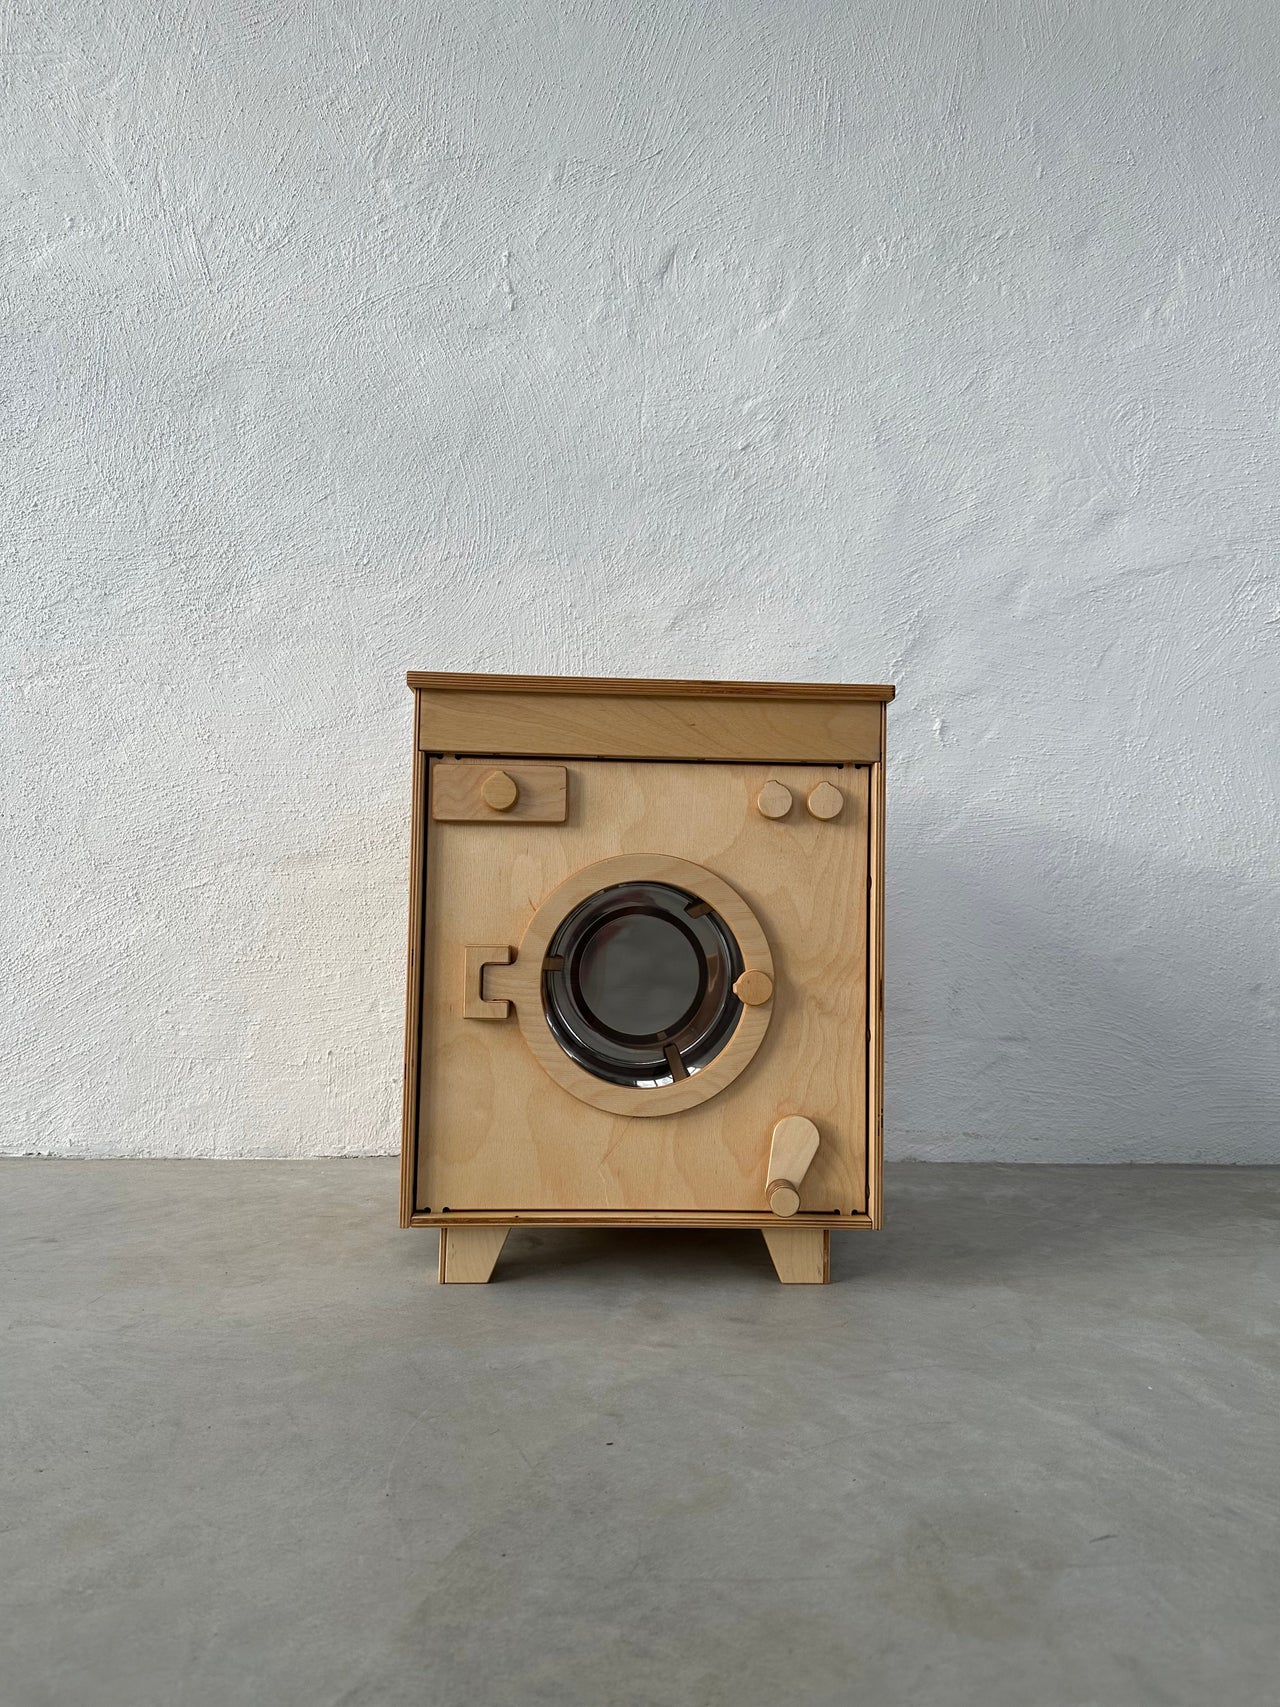 Wooden Washing Machine - Dusty Green - MIDMINI - Handcrafted wooden toys for generations.